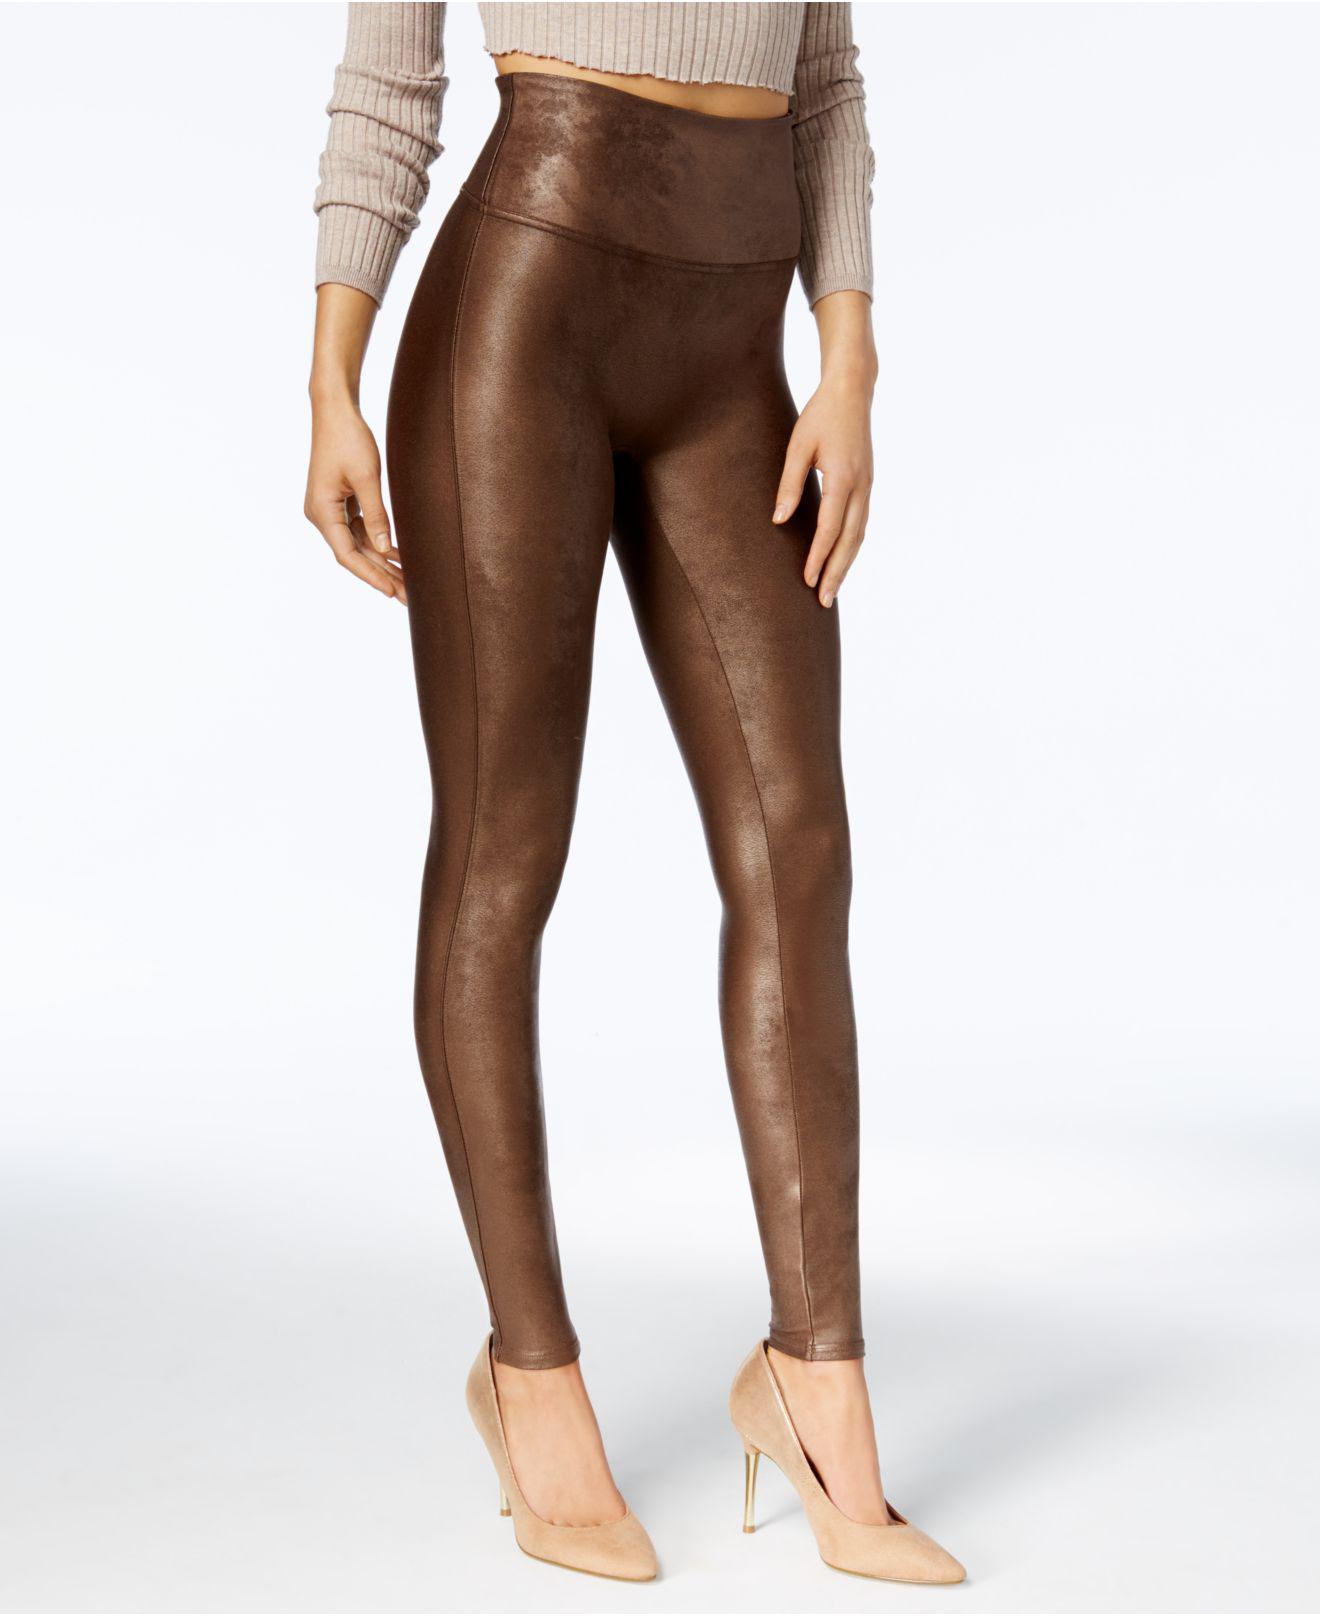 Lyst - Spanx Faux Leather Leggings in Brown